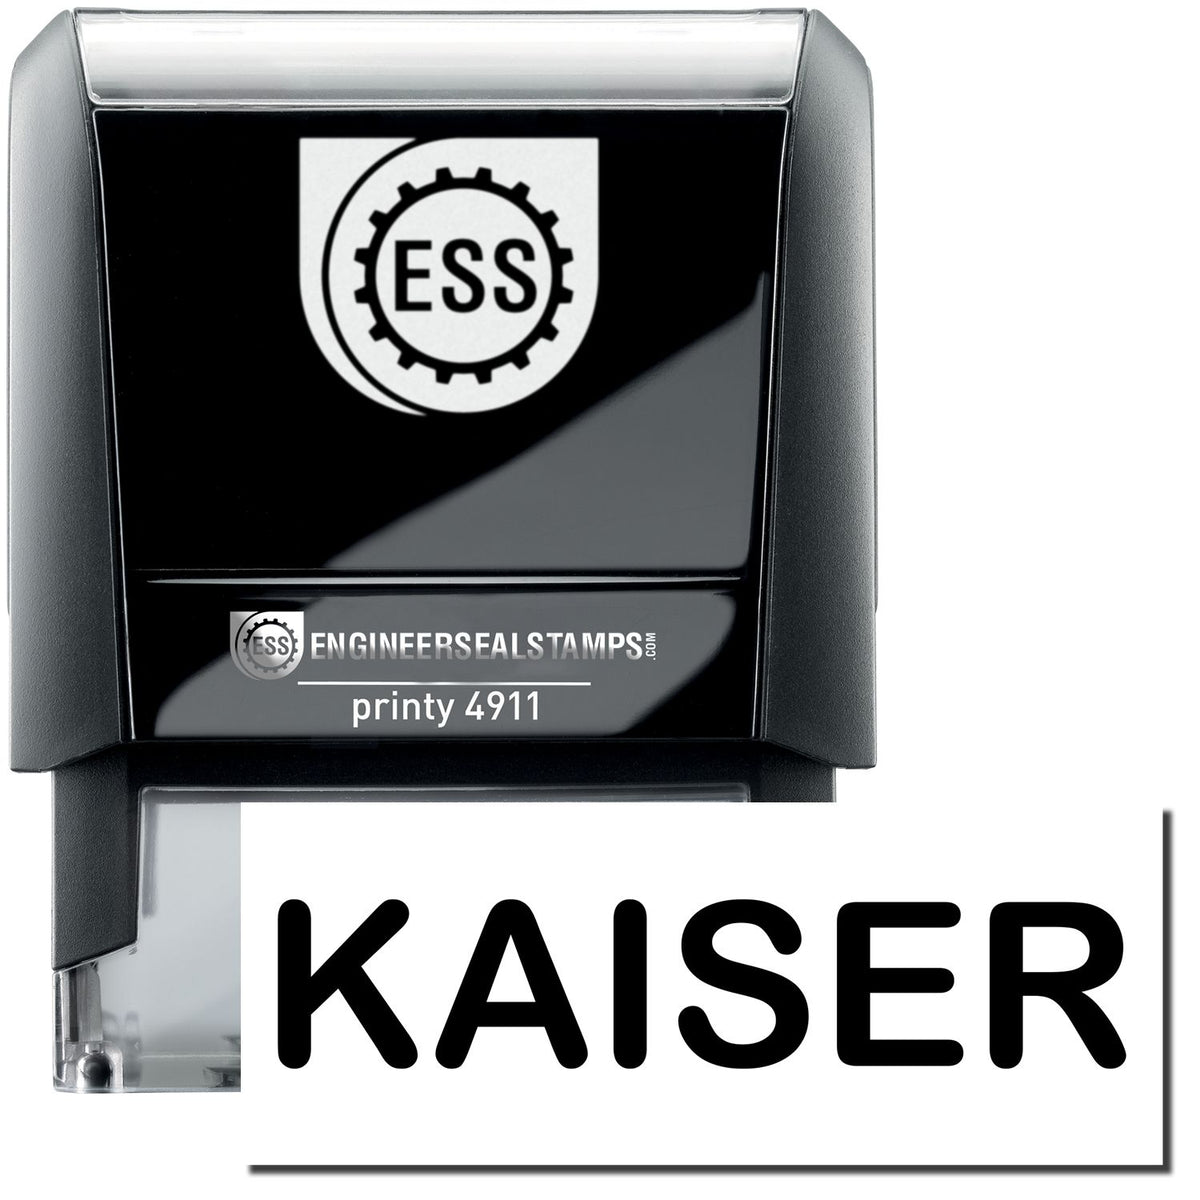 A self-inking stamp with a stamped image showing how the text &quot;KAISER&quot; is displayed after stamping.